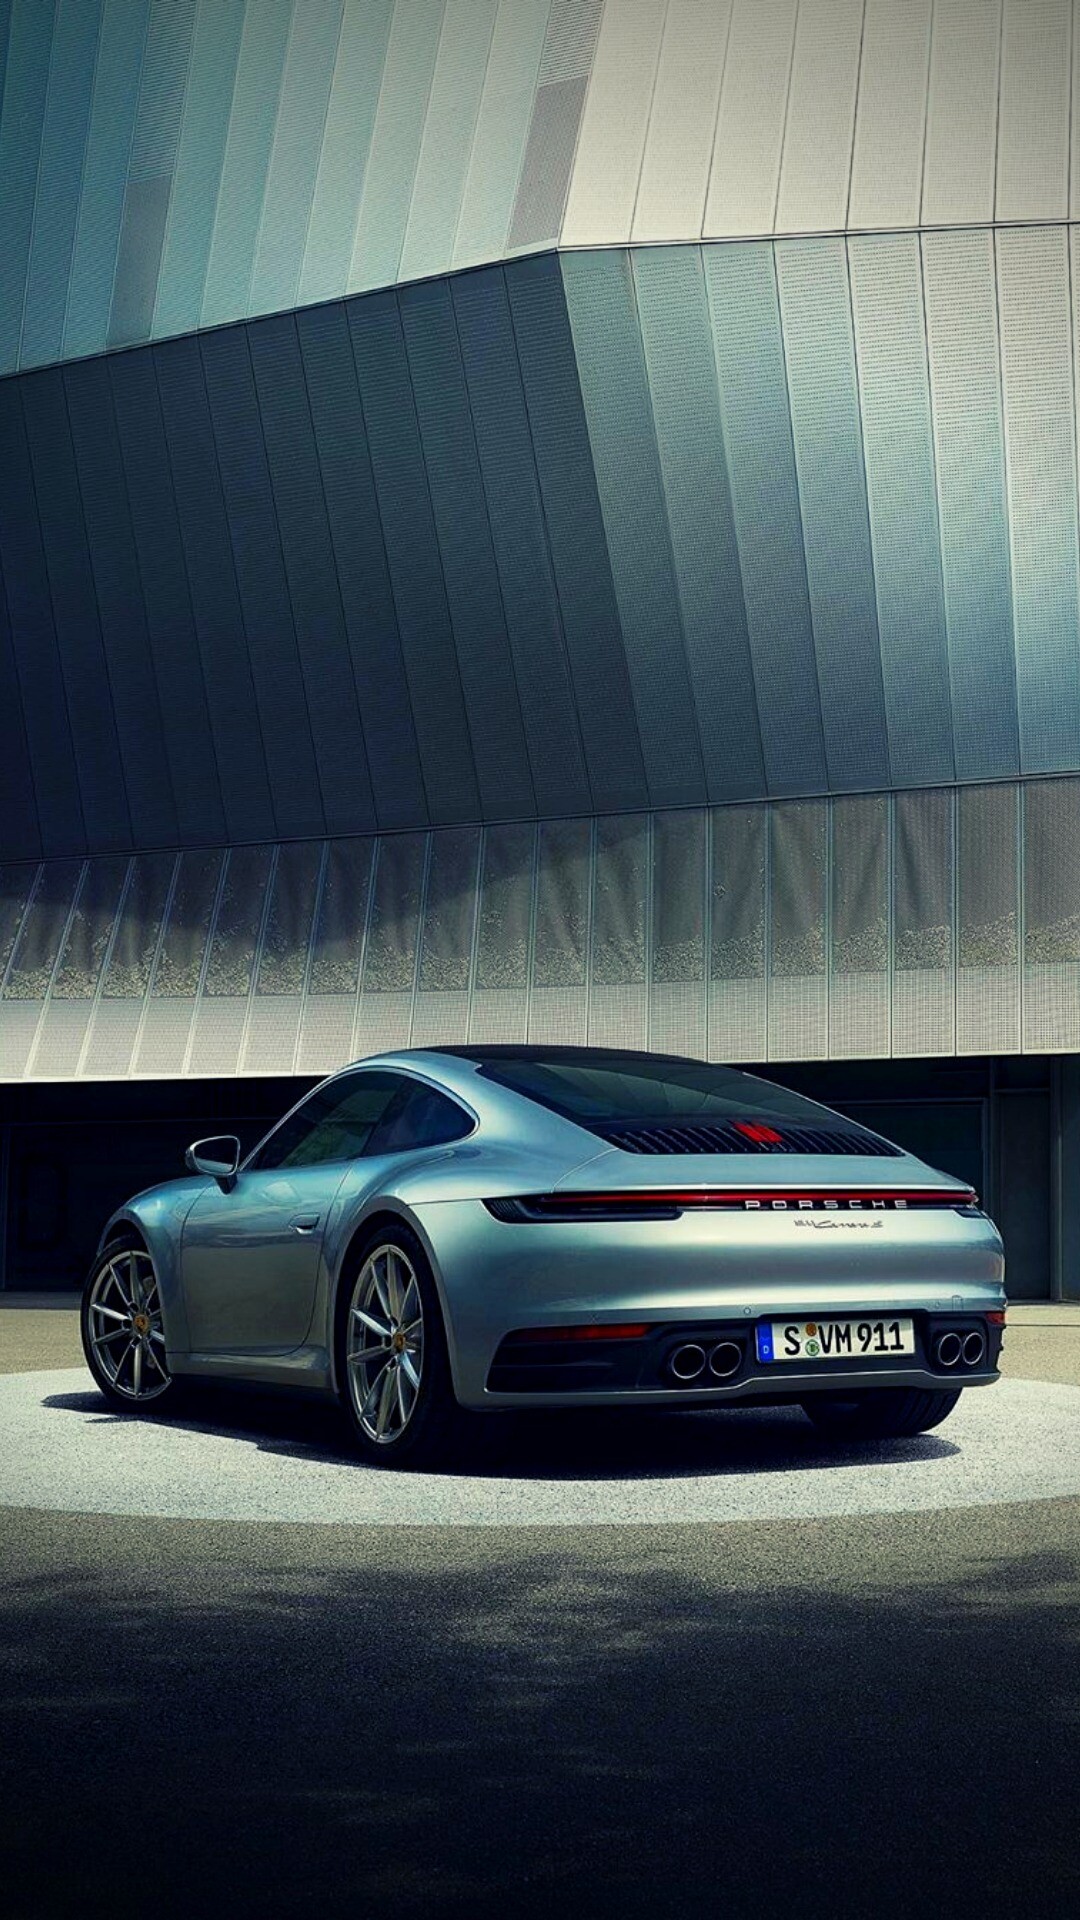 Porsche: The company started as an engineering consulting firm geared towards the automotive industry, German carmaker. 1080x1920 Full HD Wallpaper.